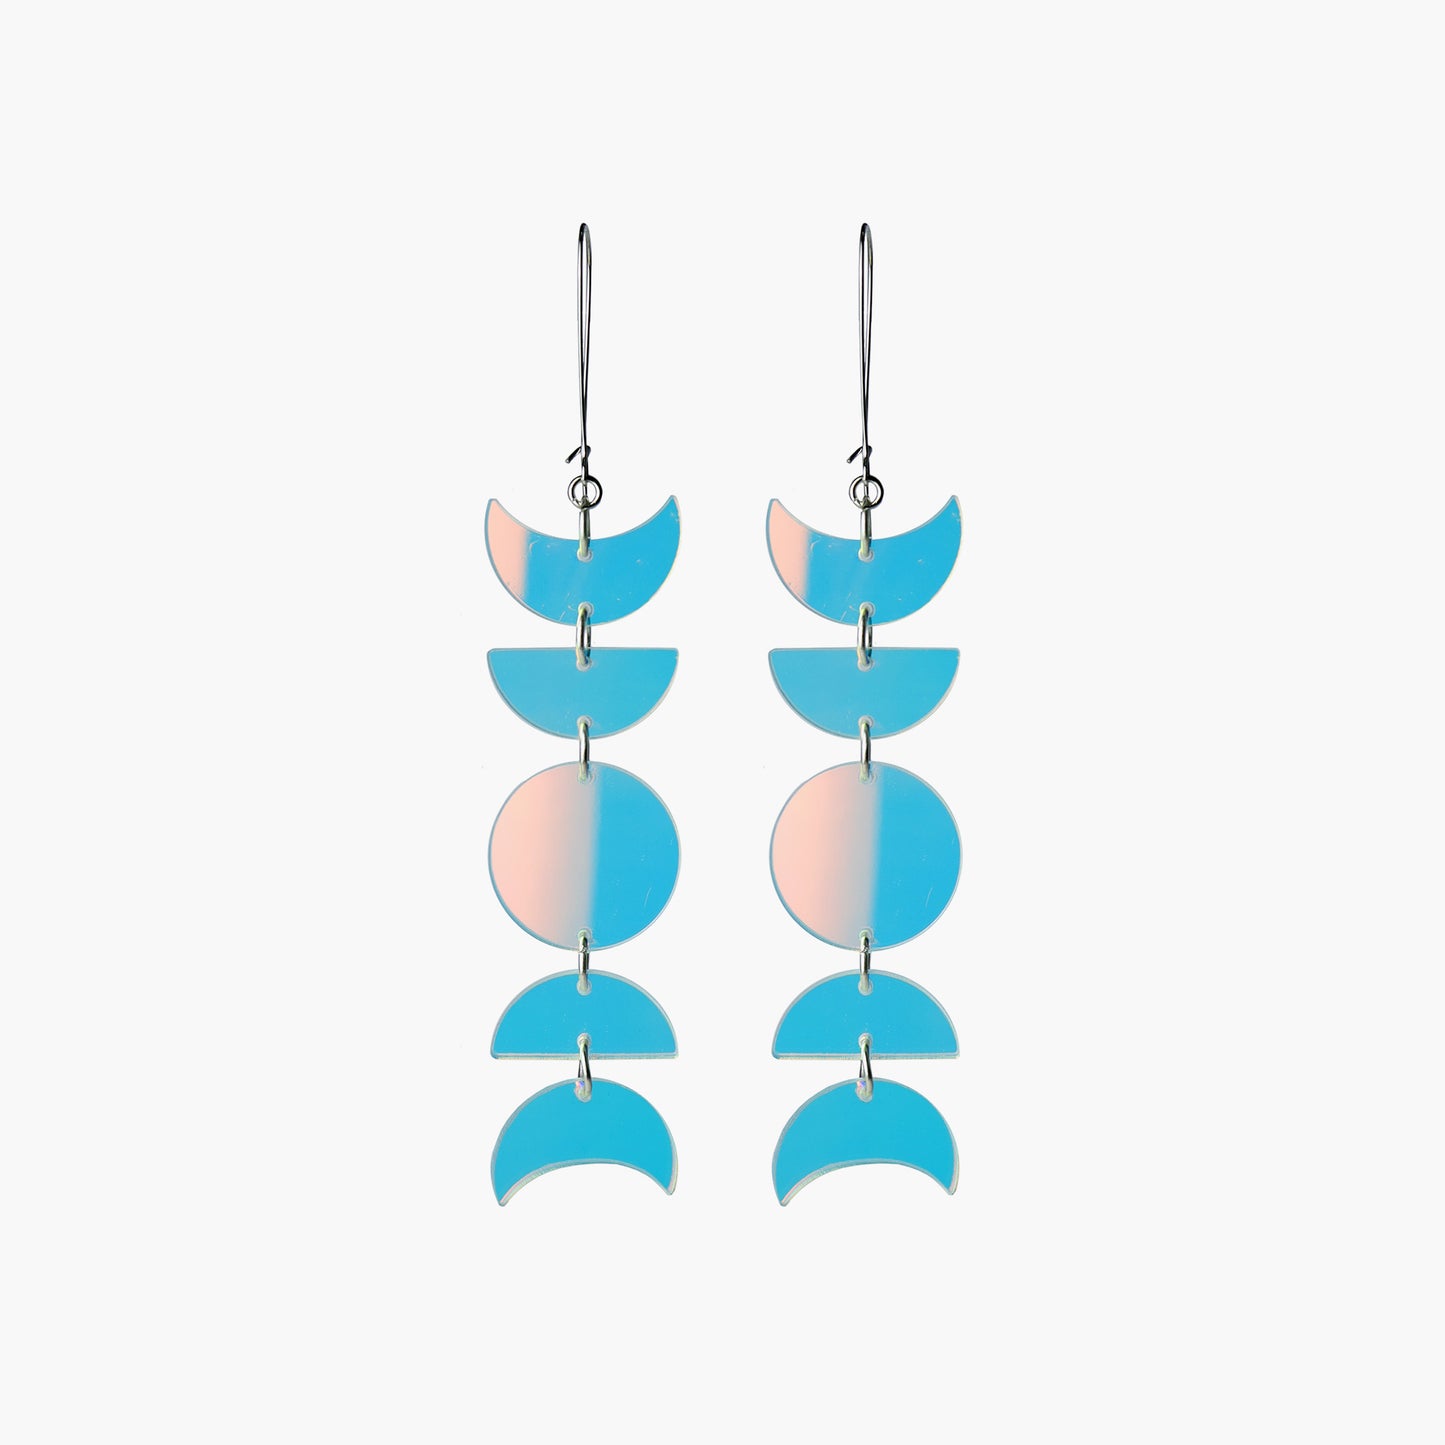 Front view image of Indi City Moonphase Earrings in iridescent transparent acrylic. These long drop earrings beautifully capture a fusion of cultural and contemporary styles, symbolizing the ever-changing phases of the moon.